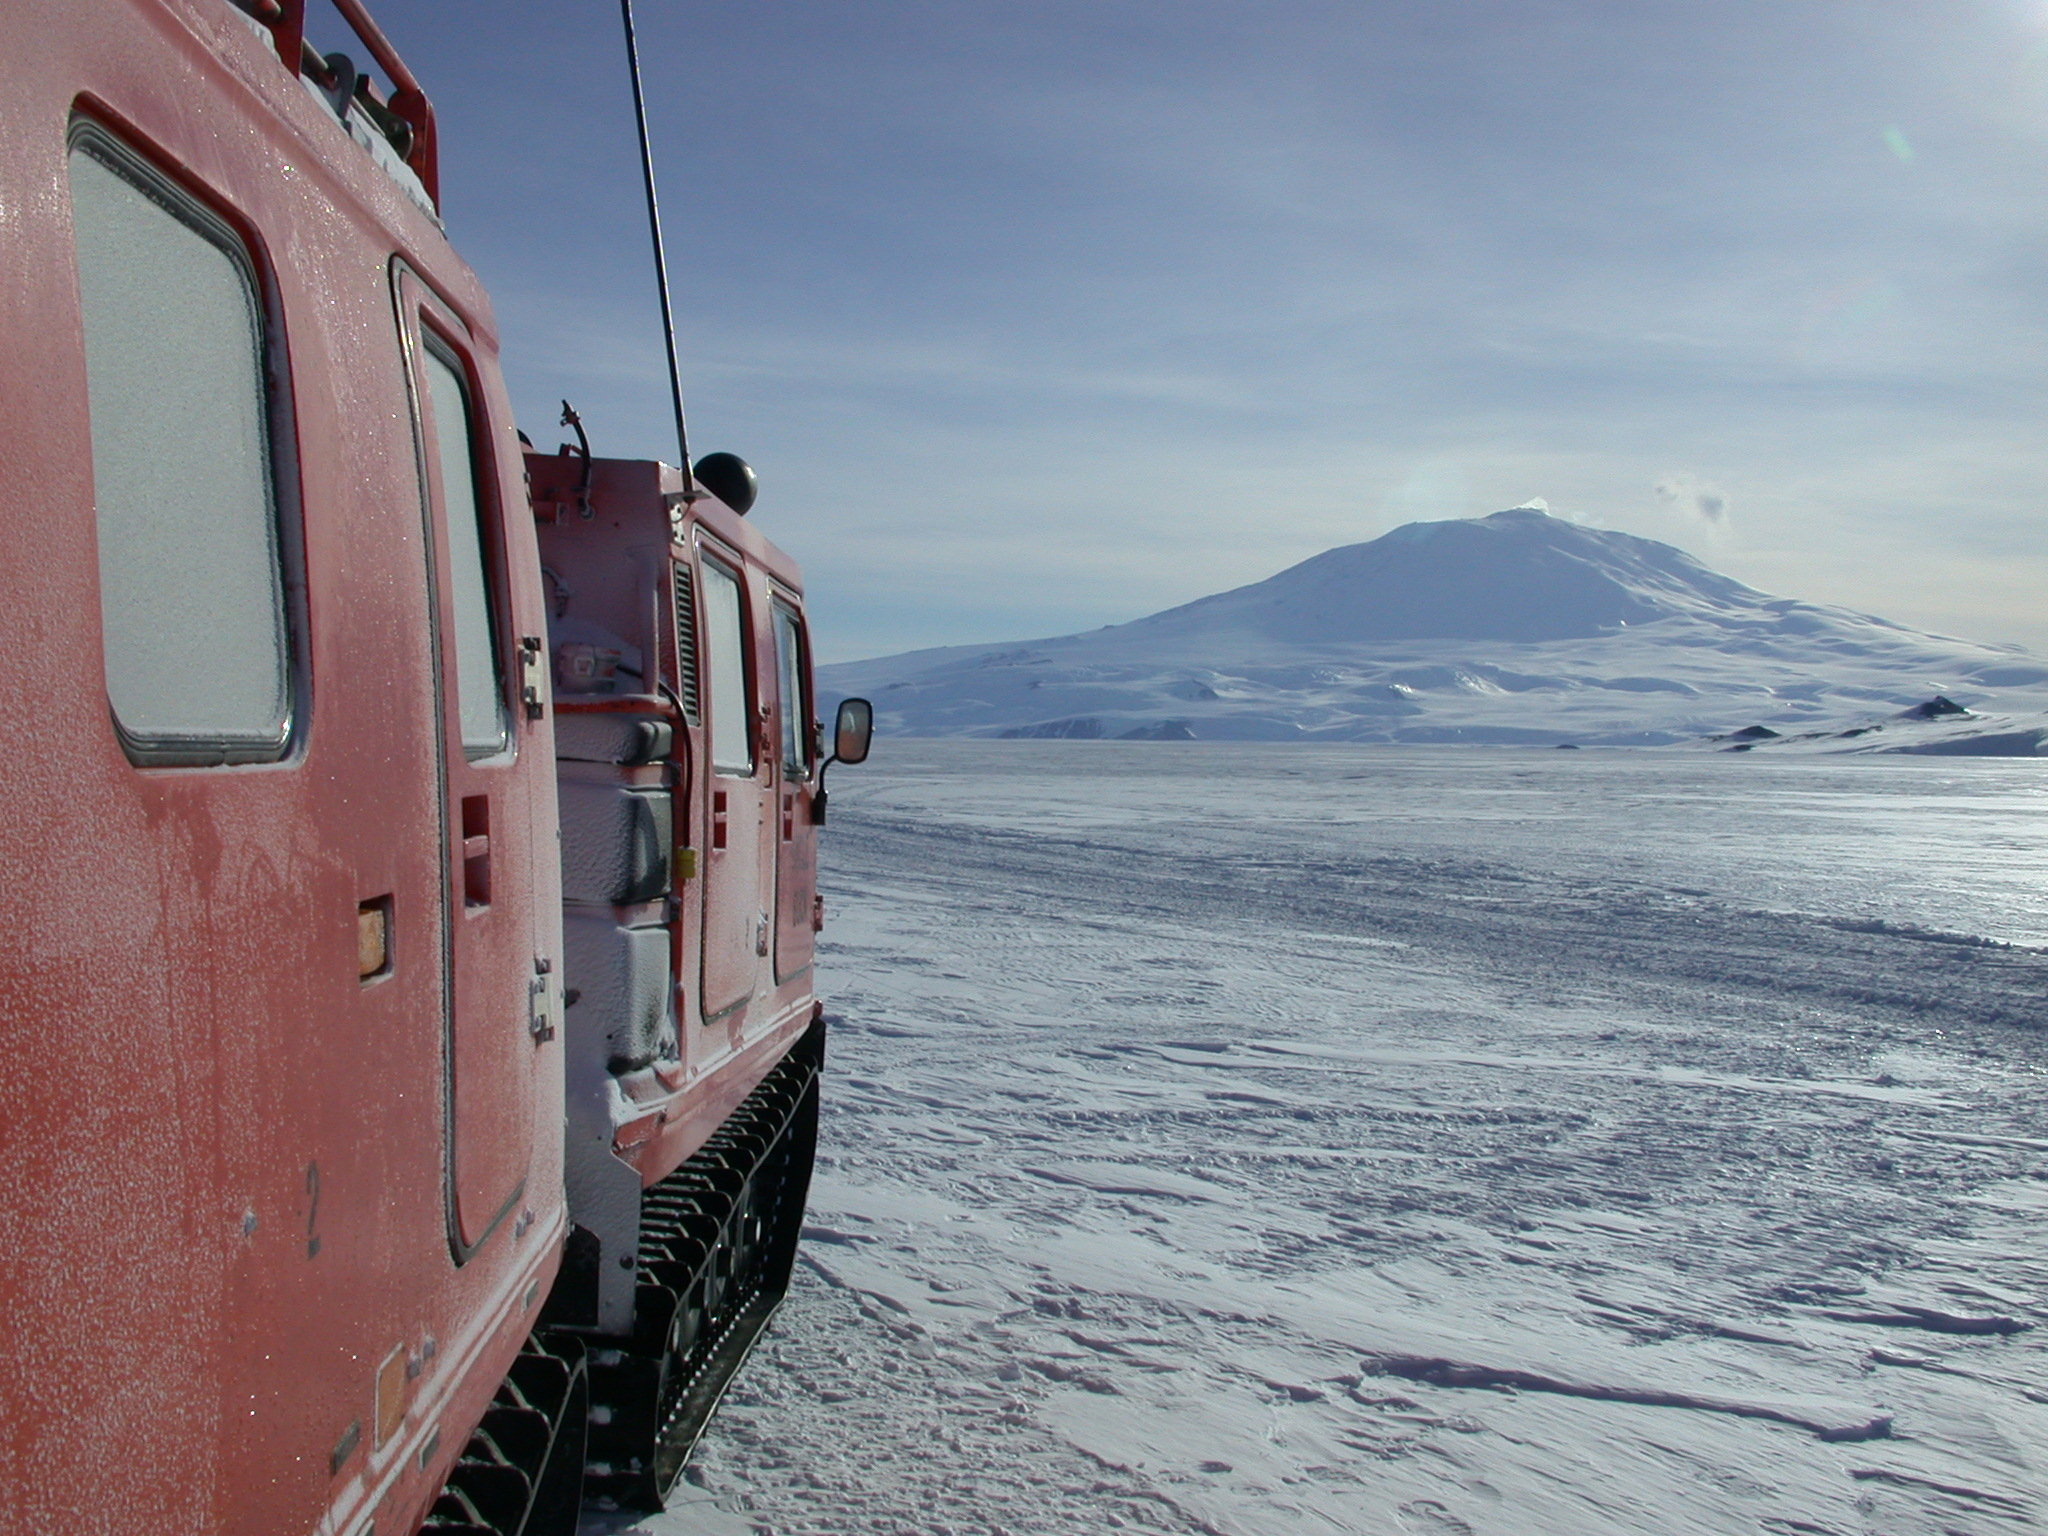 A tracked vehicle with a volcano in the background.